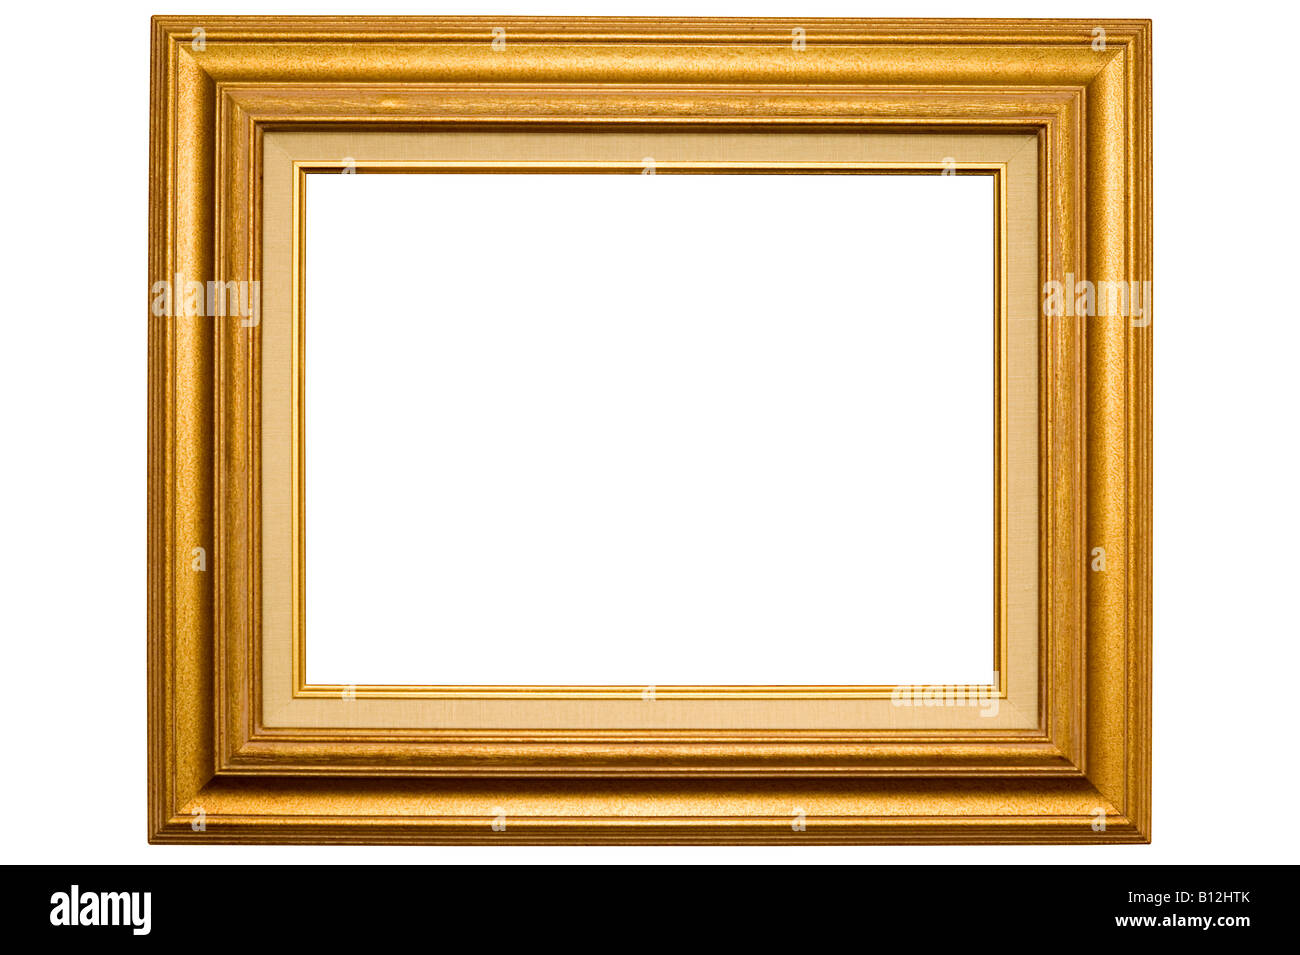 A gold coloured picture frame with beige canvas border isolated on a white background Stock Photo